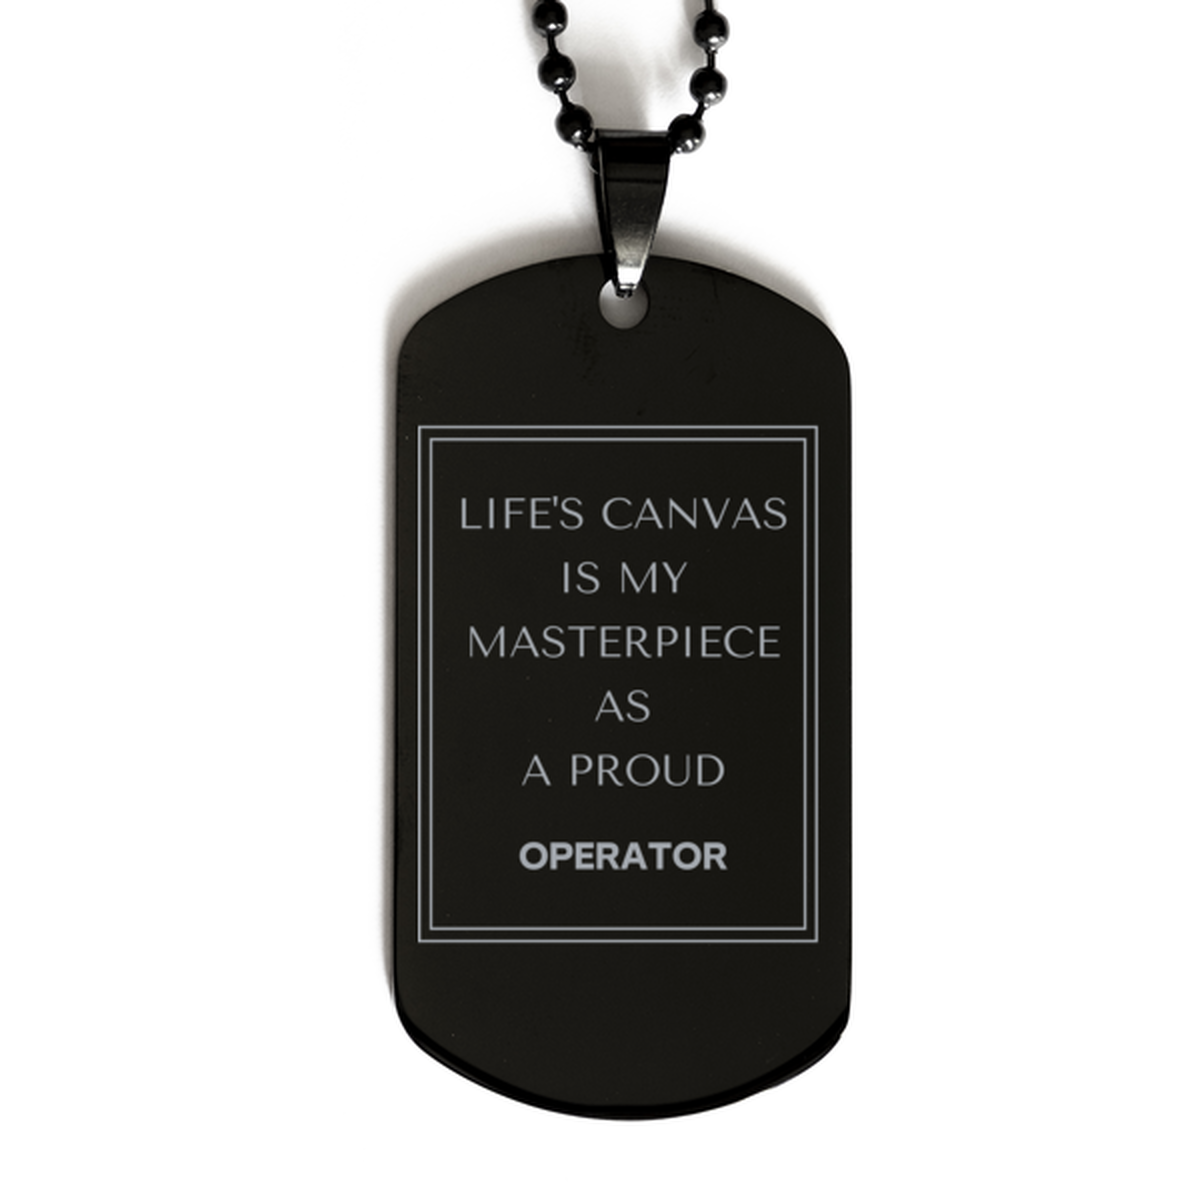 Proud Operator Gifts, Life's canvas is my masterpiece, Epic Birthday Christmas Unique Black Dog Tag For Operator, Coworkers, Men, Women, Friends